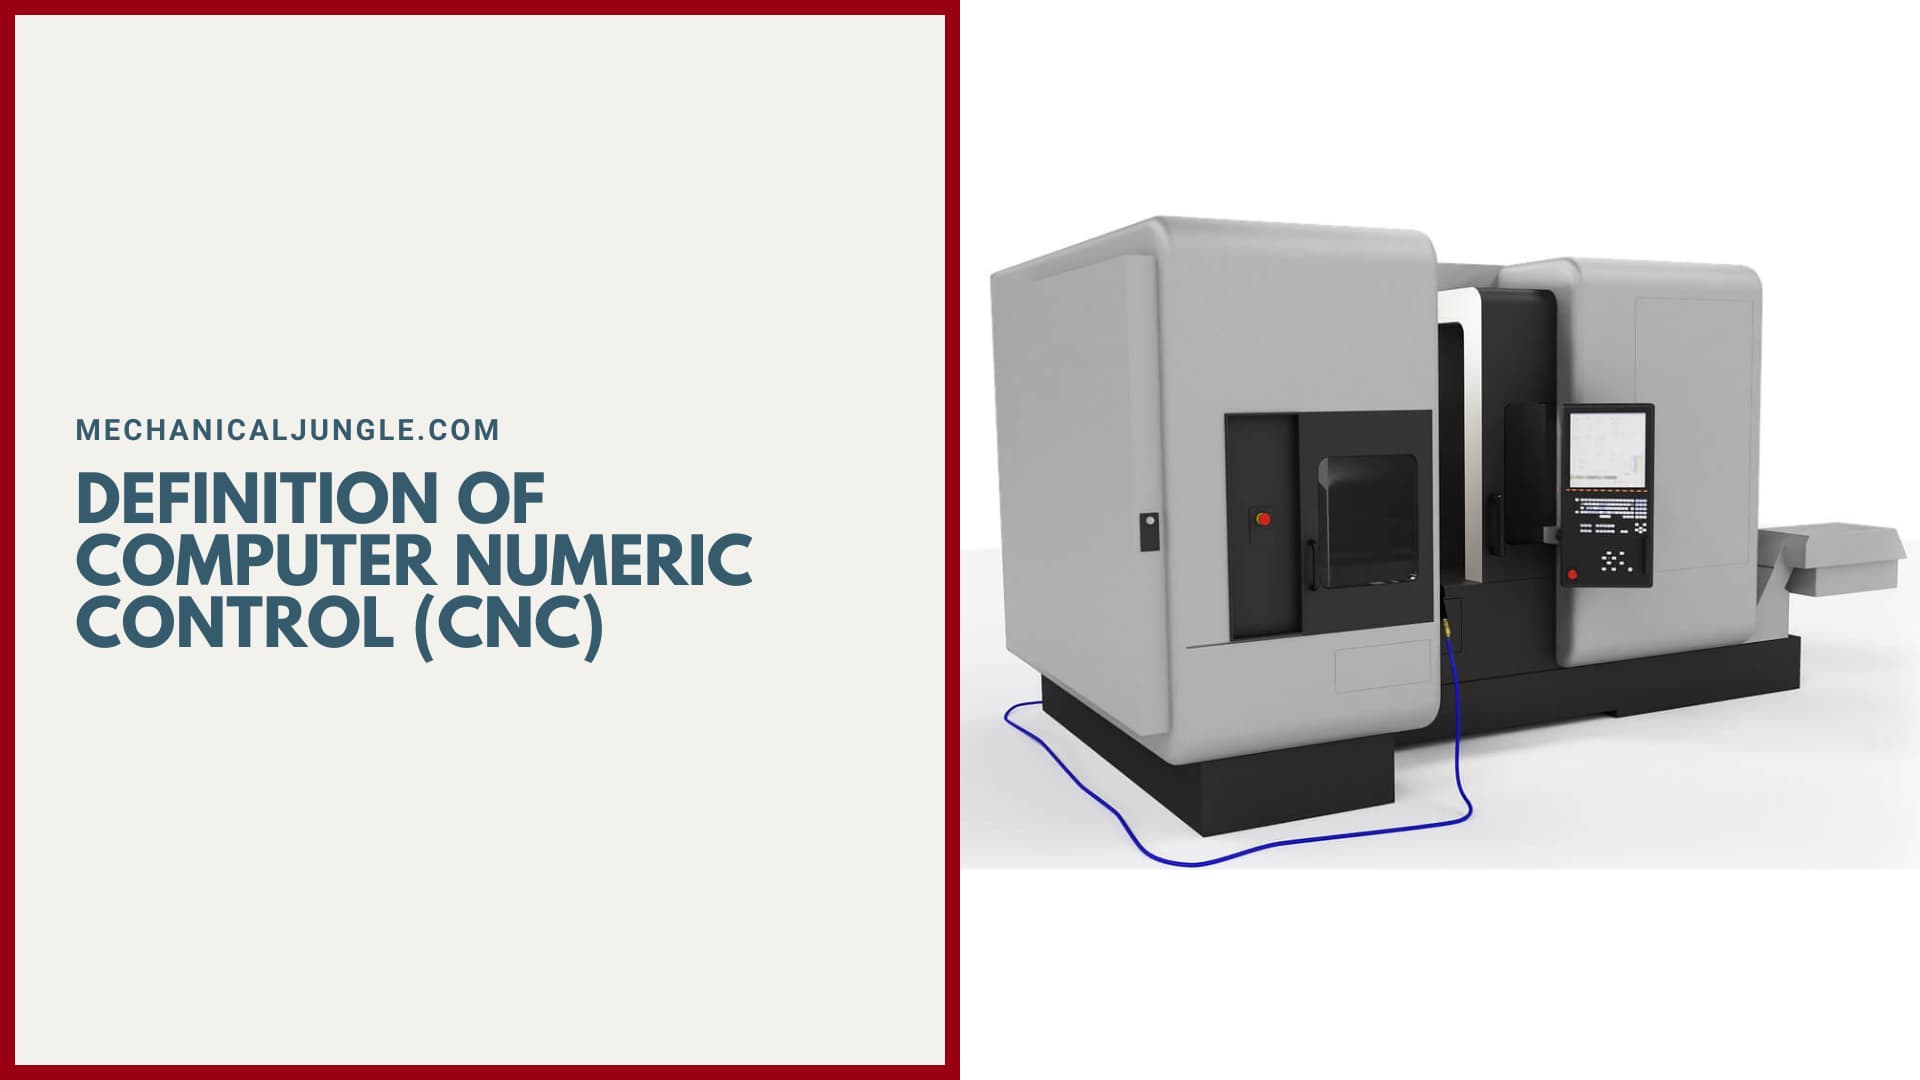 Definition of Computer Numeric Control (CNC)